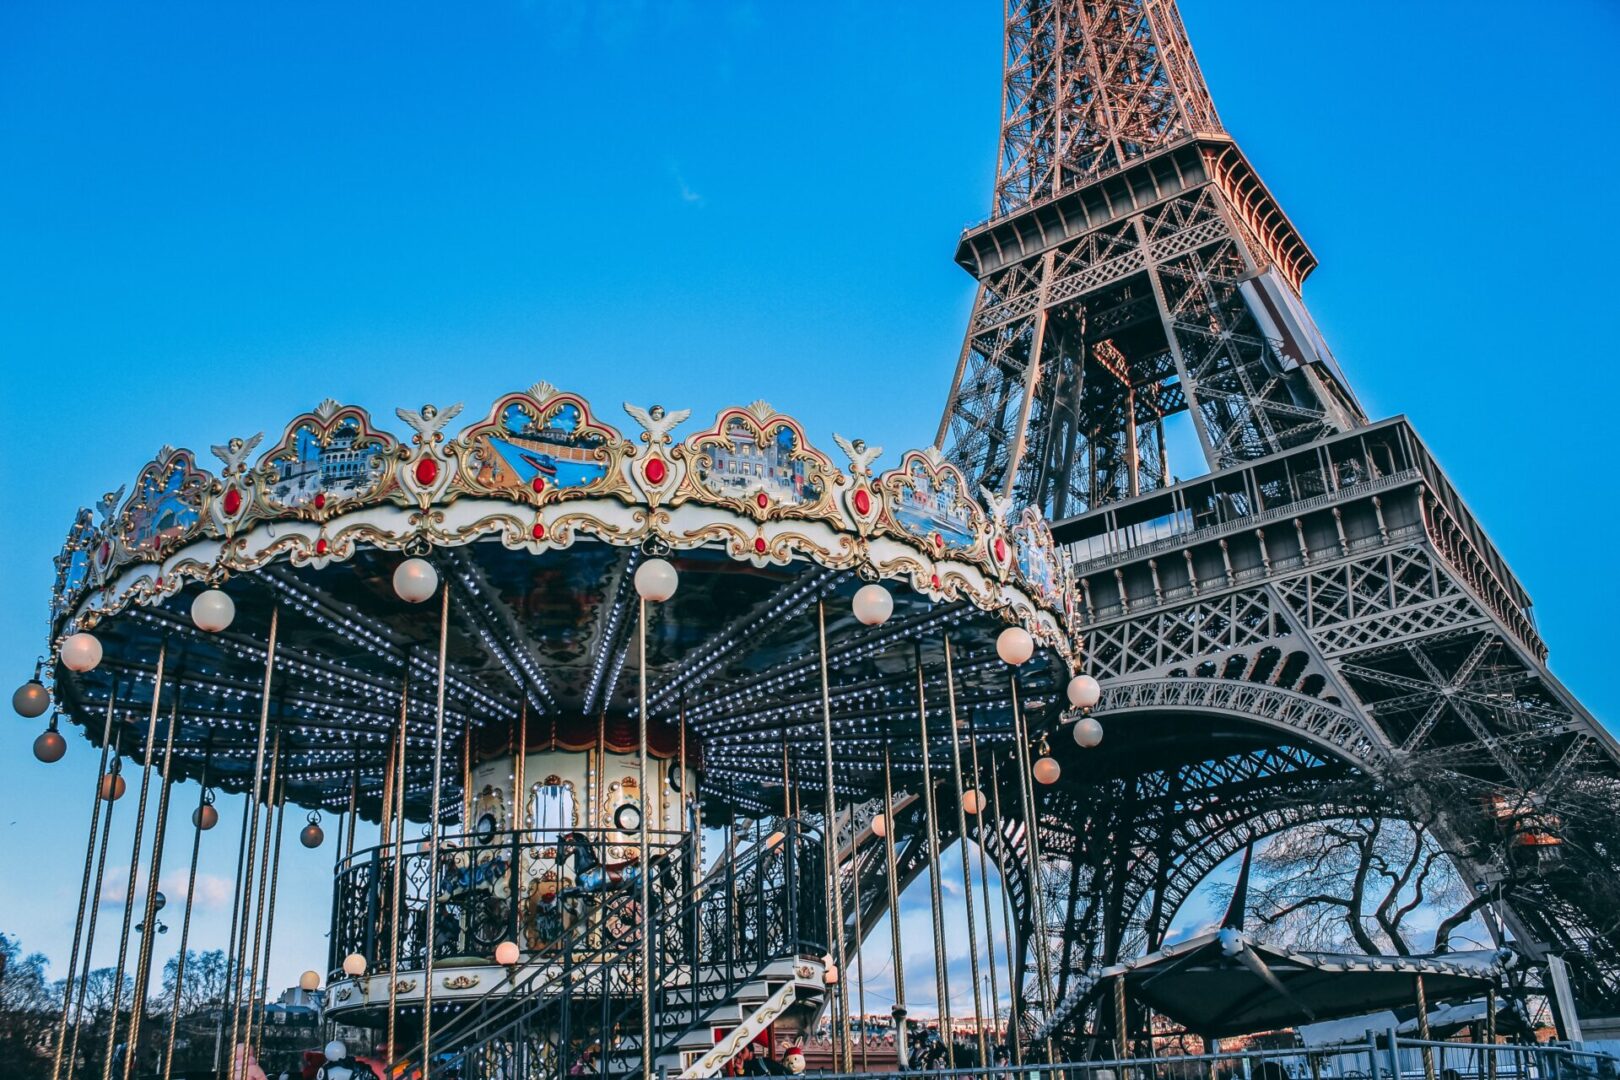 A carousel in front of the eiffel tower.